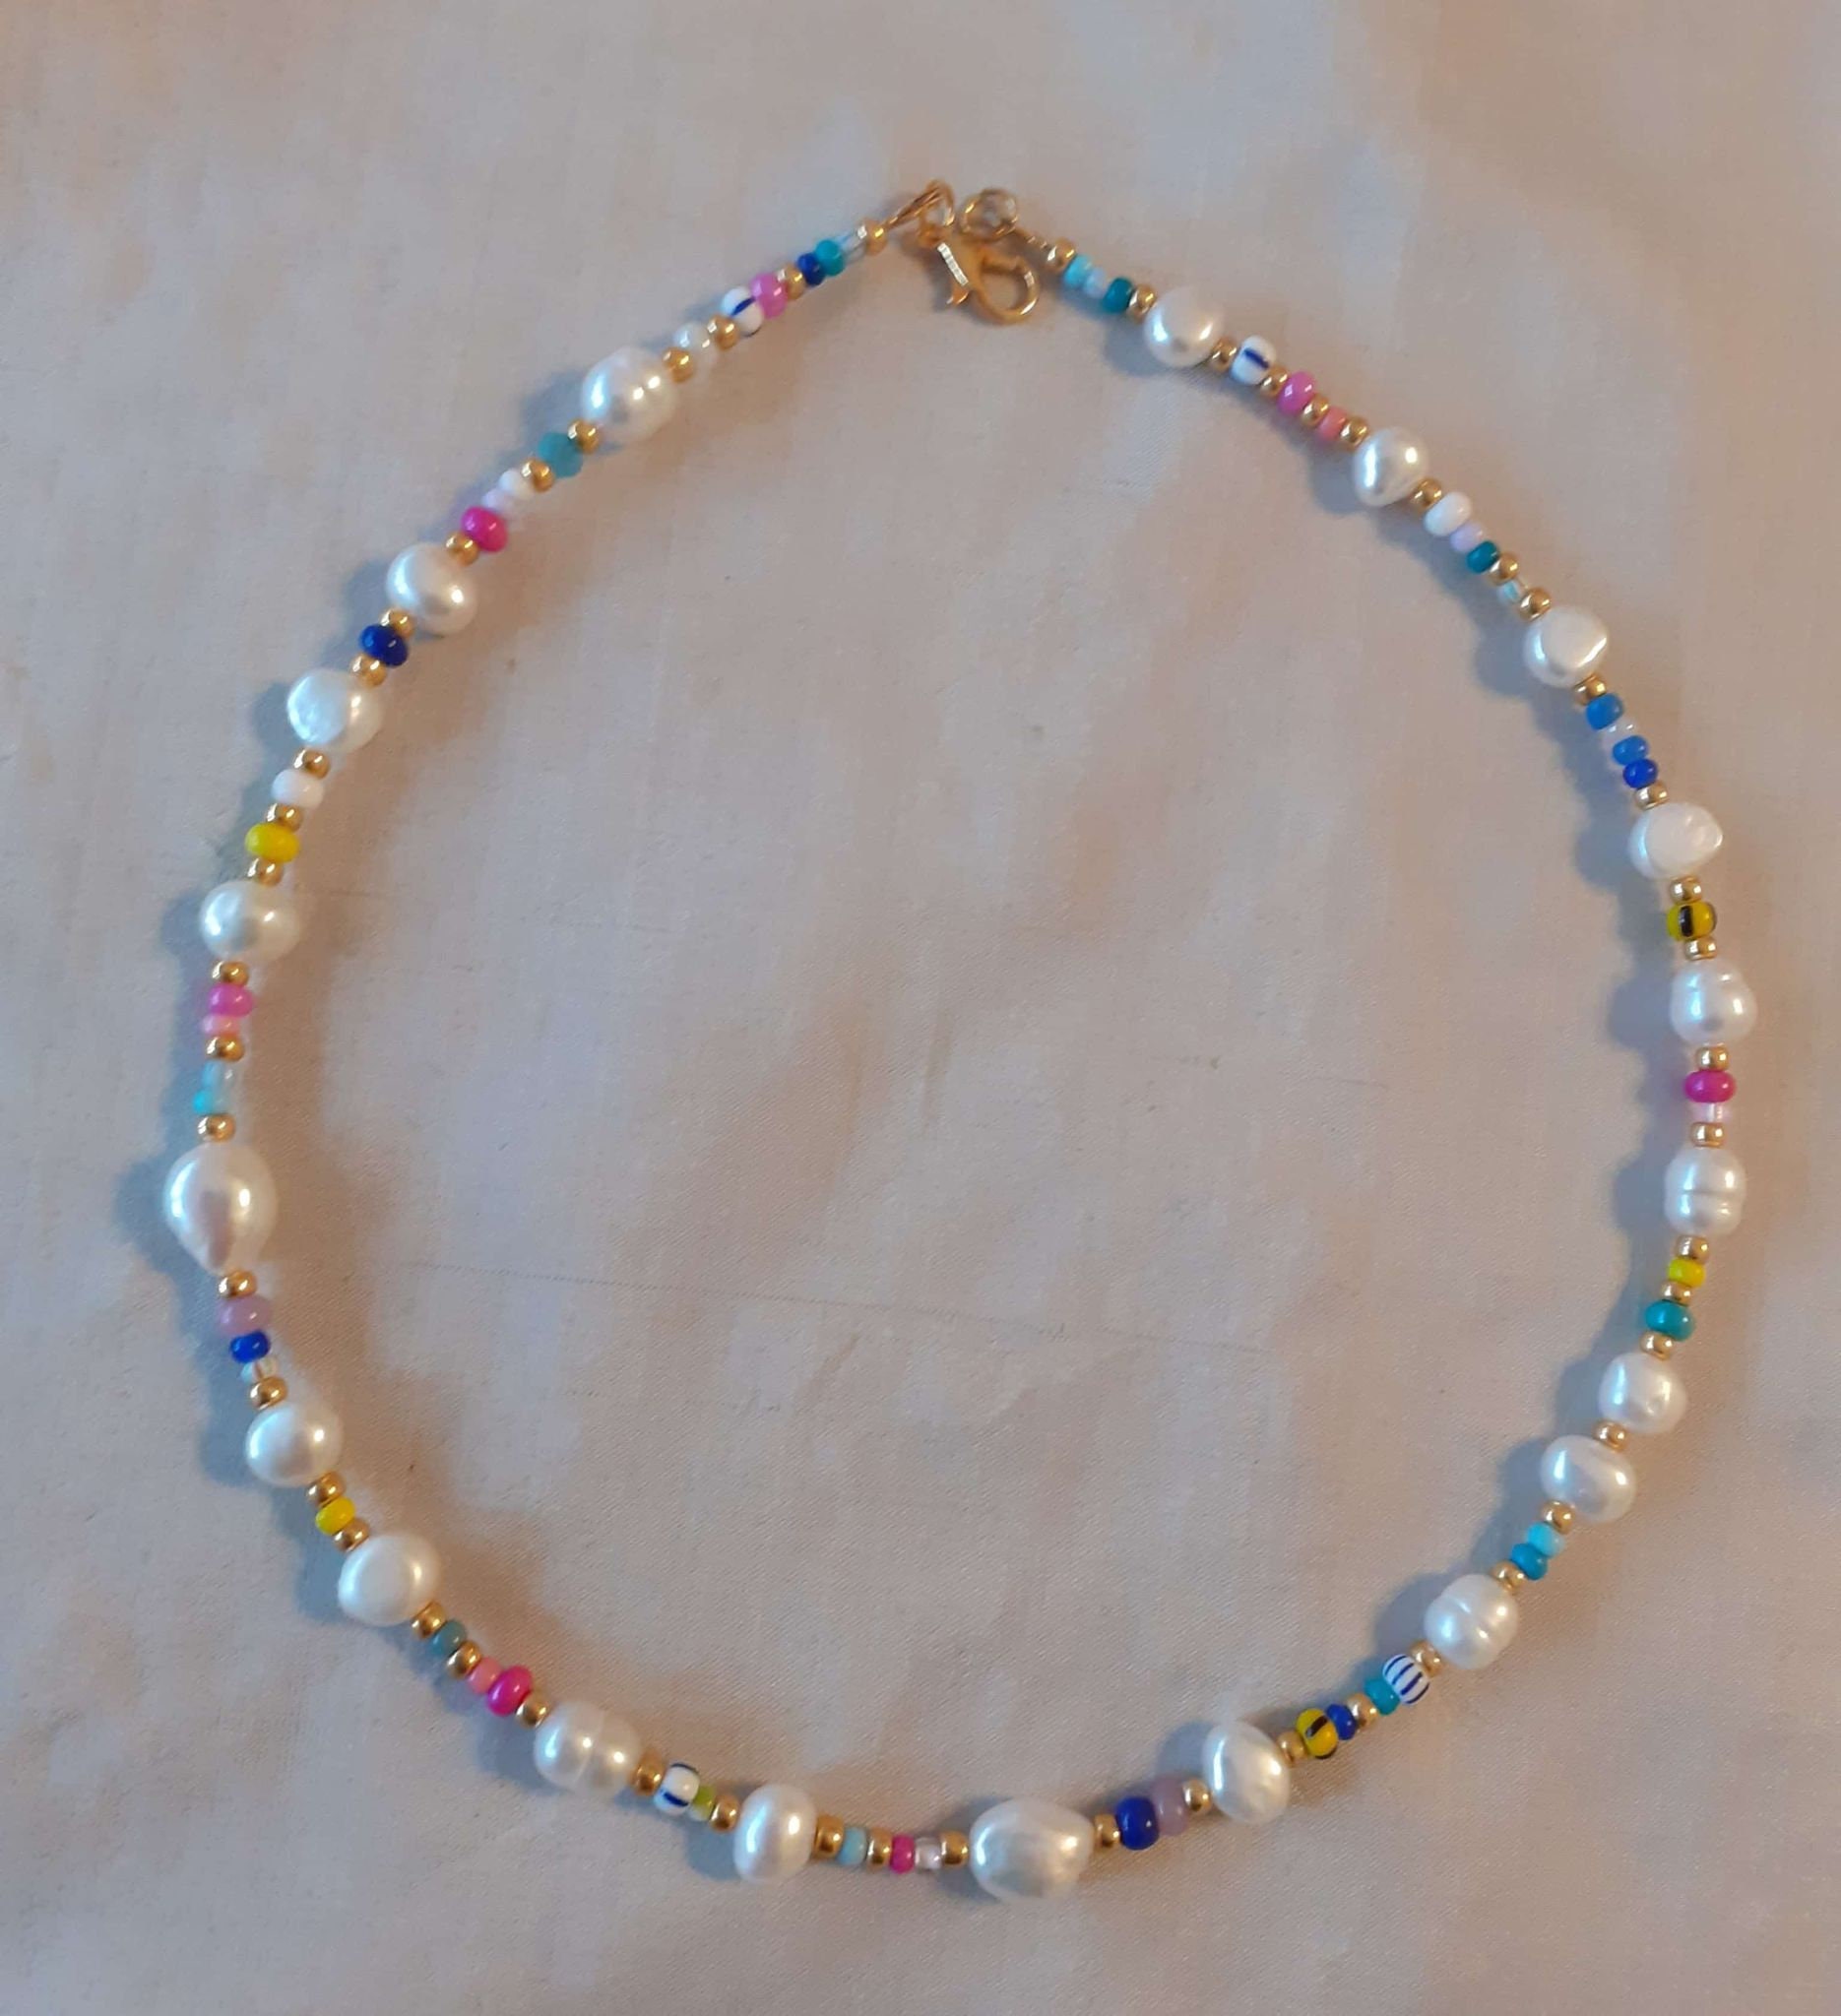 Freshwater Pearl Necklace with Tiny Beads